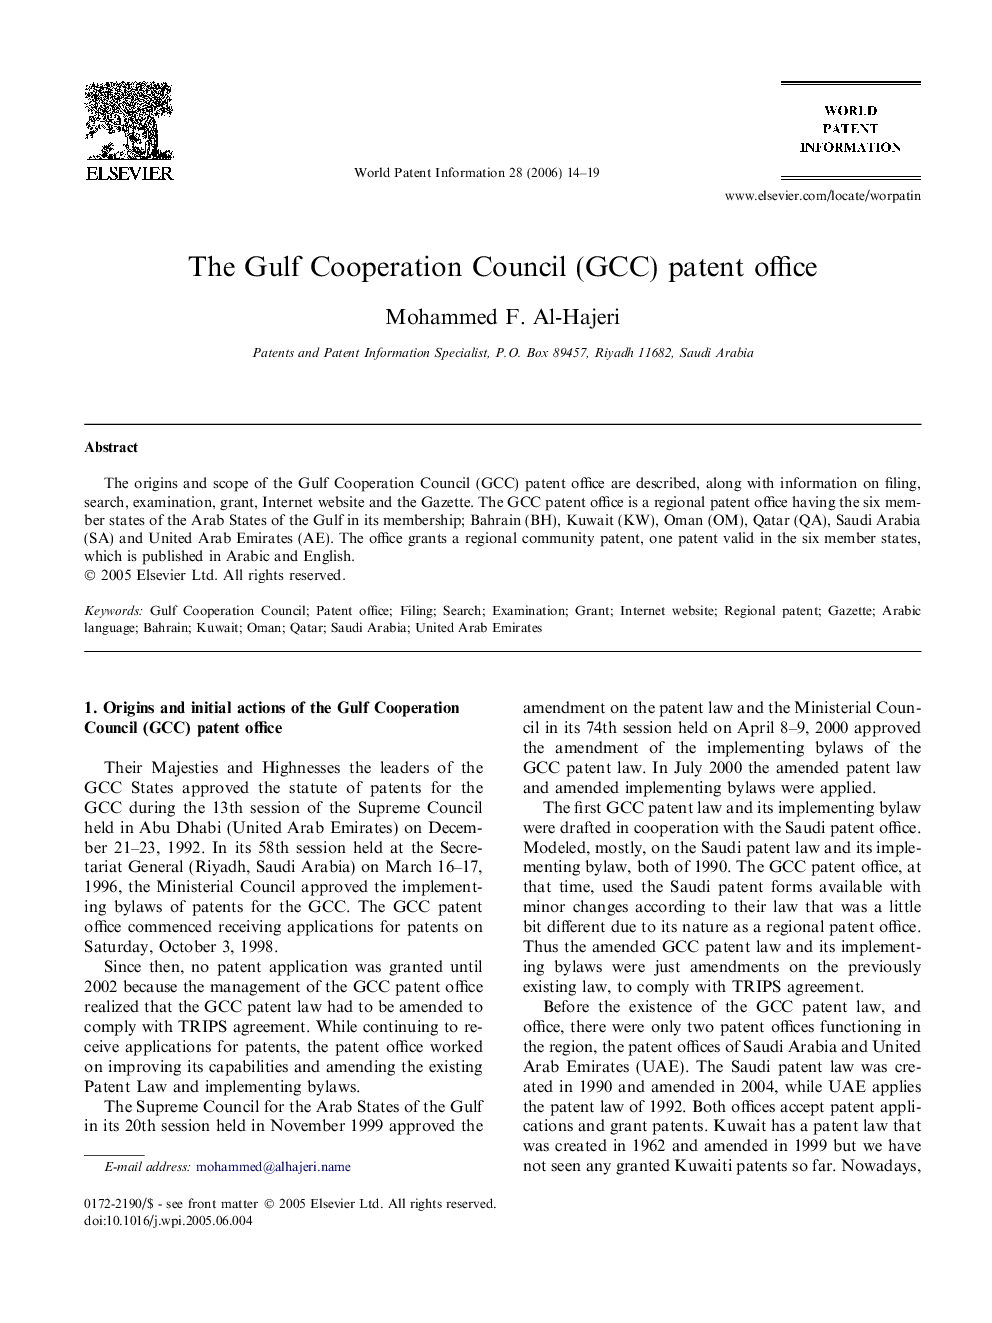 The Gulf Cooperation Council (GCC) patent office